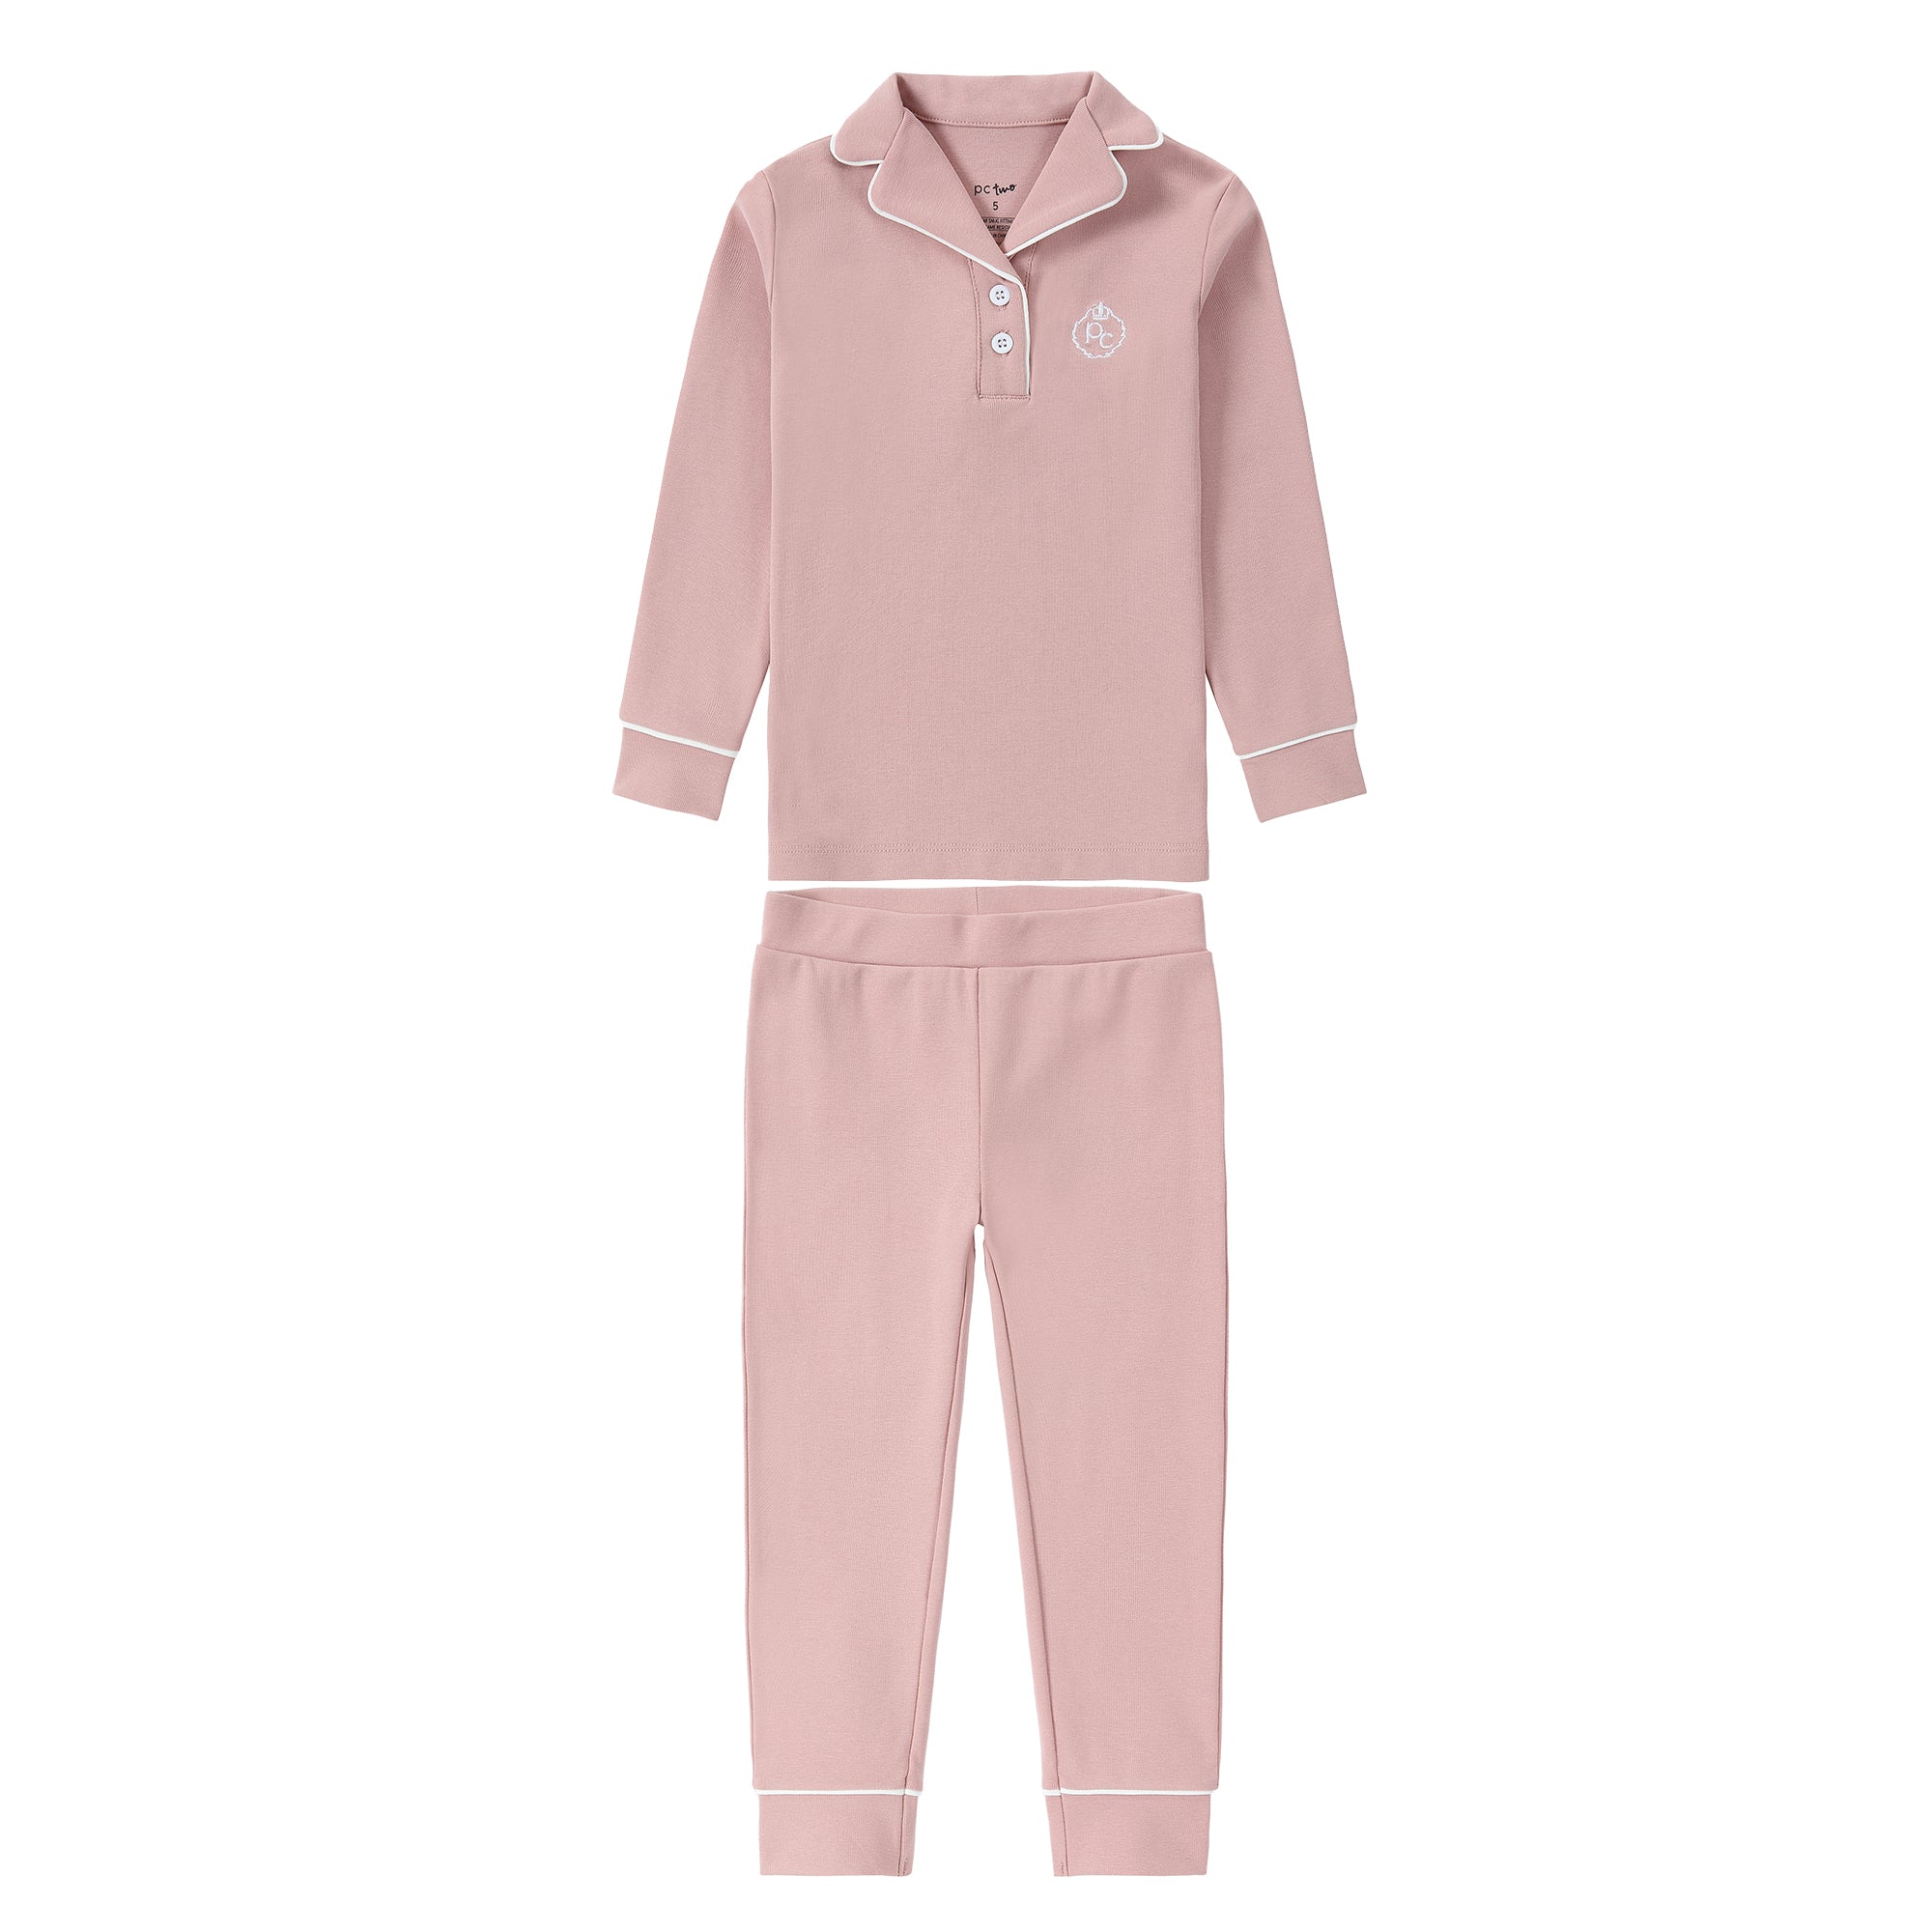 Light Pink Collar Pajama With White Accents – Petit Clair